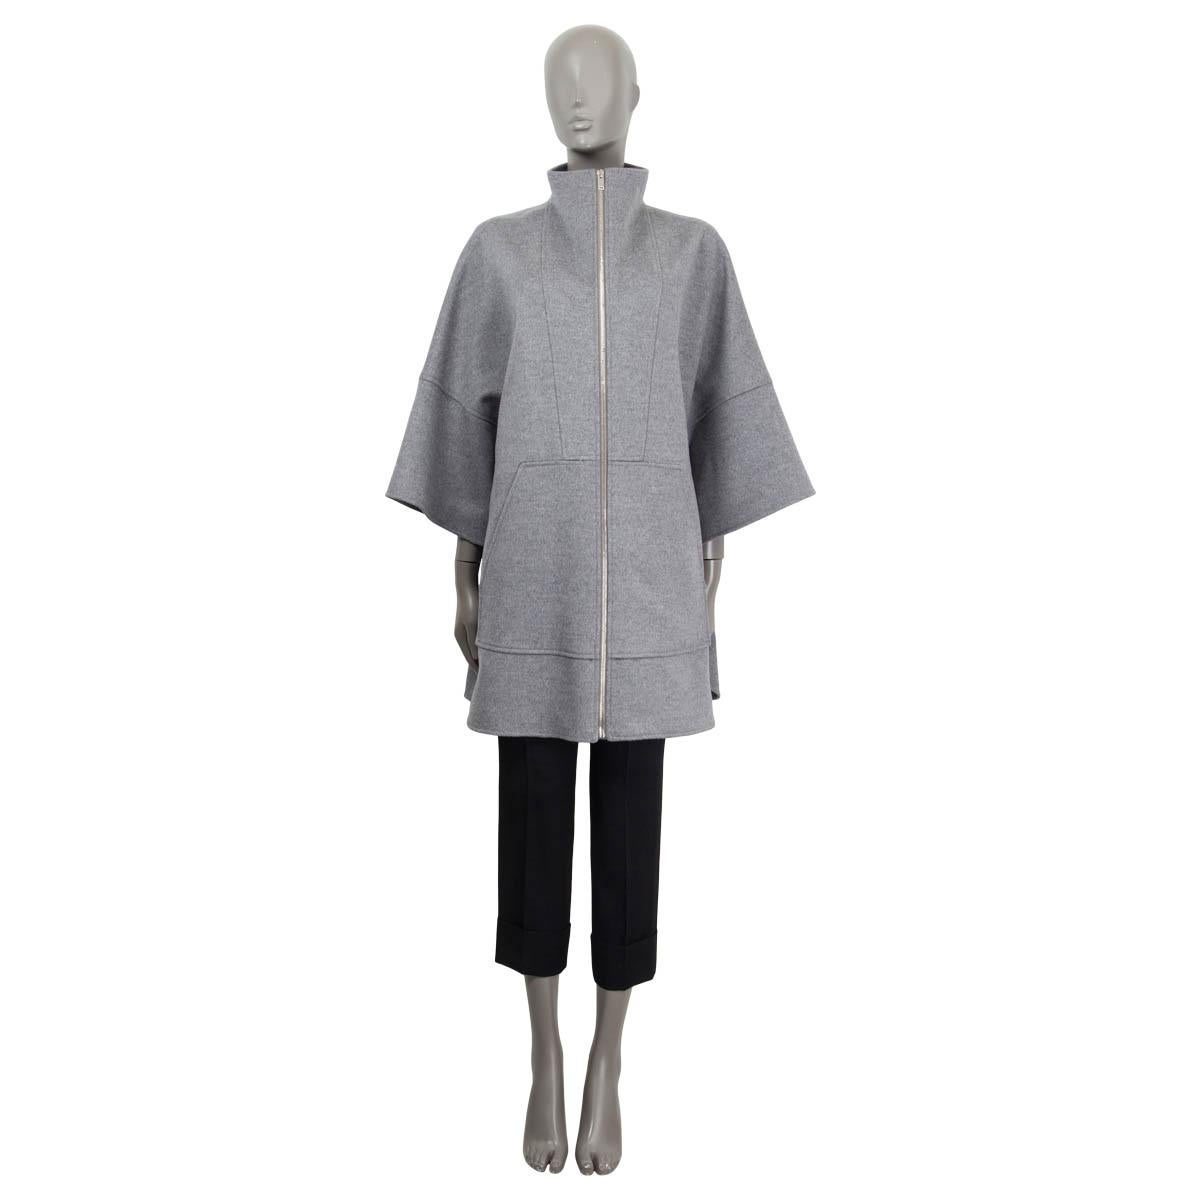 100% authentic Stella McCartney zipped cape coat in light grey wool (100%) featuring two big front pockets and open side parts. Unlined. Has been worn once and is in virtually new condition. 

Measurements
Tag Size	40
Size	S
Shoulder Width	50cm